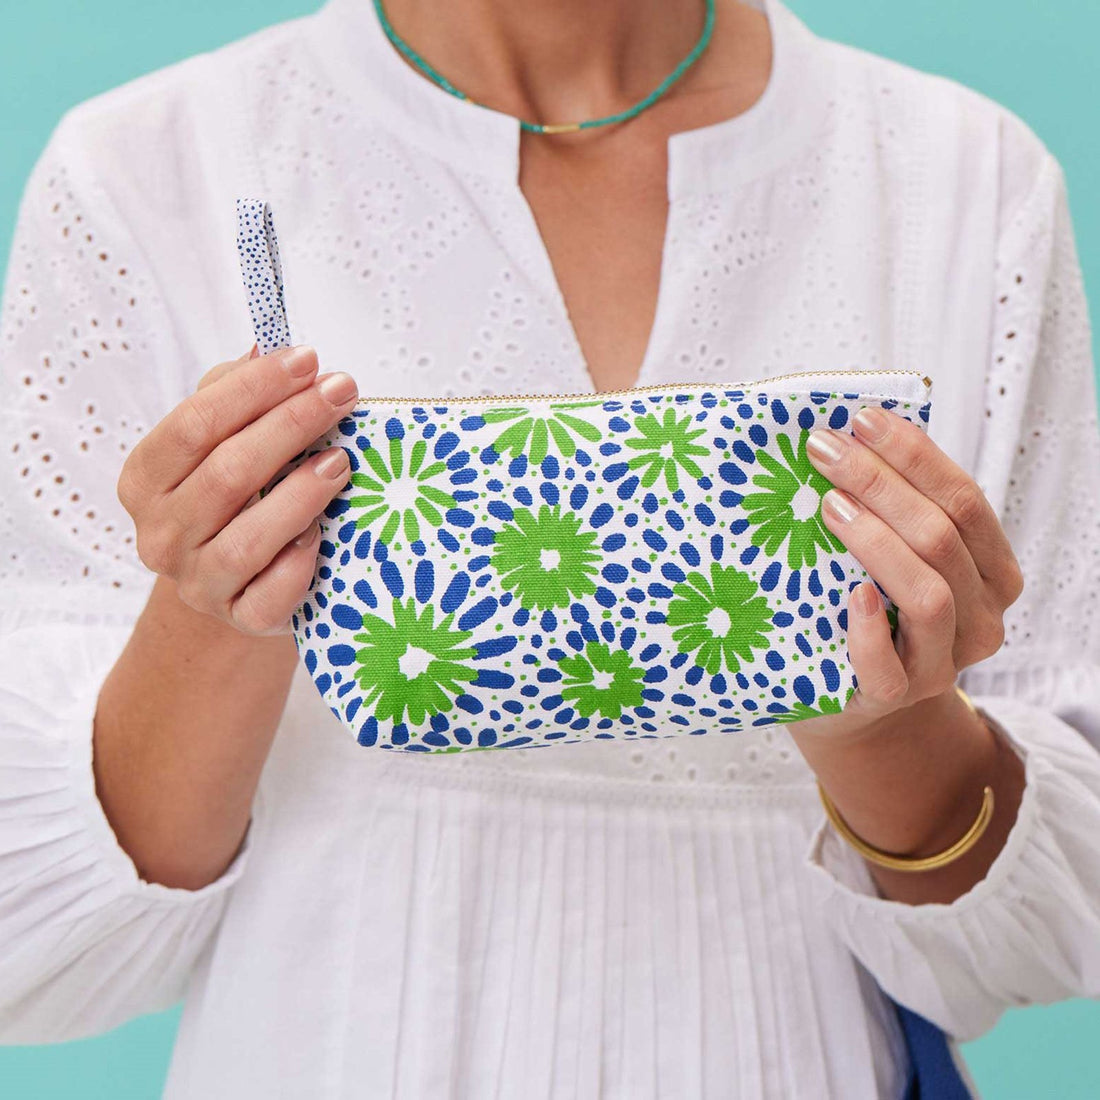 Chamomile Navy Green Small Relaxed Pouch Pouch - rockflowerpaper